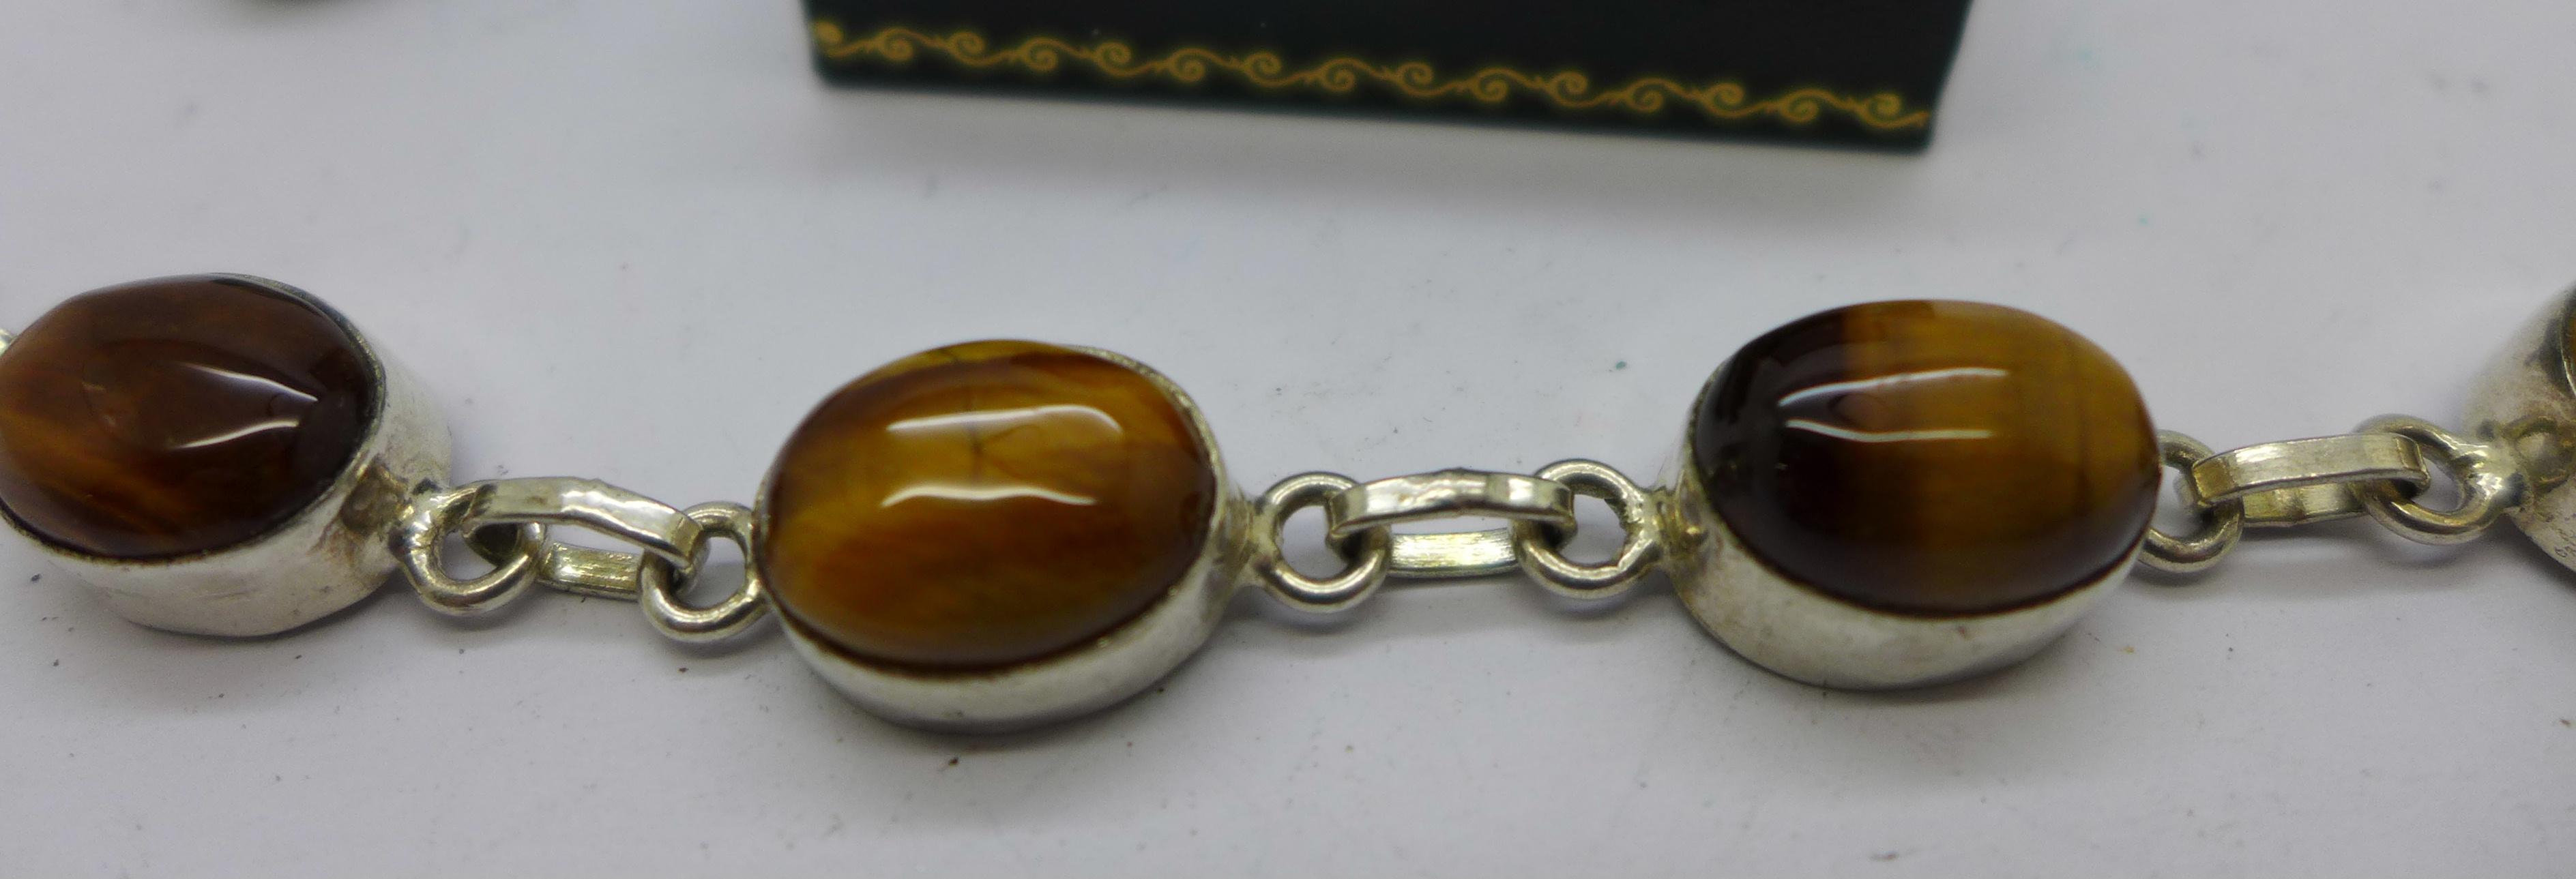 A silver and tigers eye bracelet, jade and silver earrings and a silver enamelled ring - Image 2 of 3